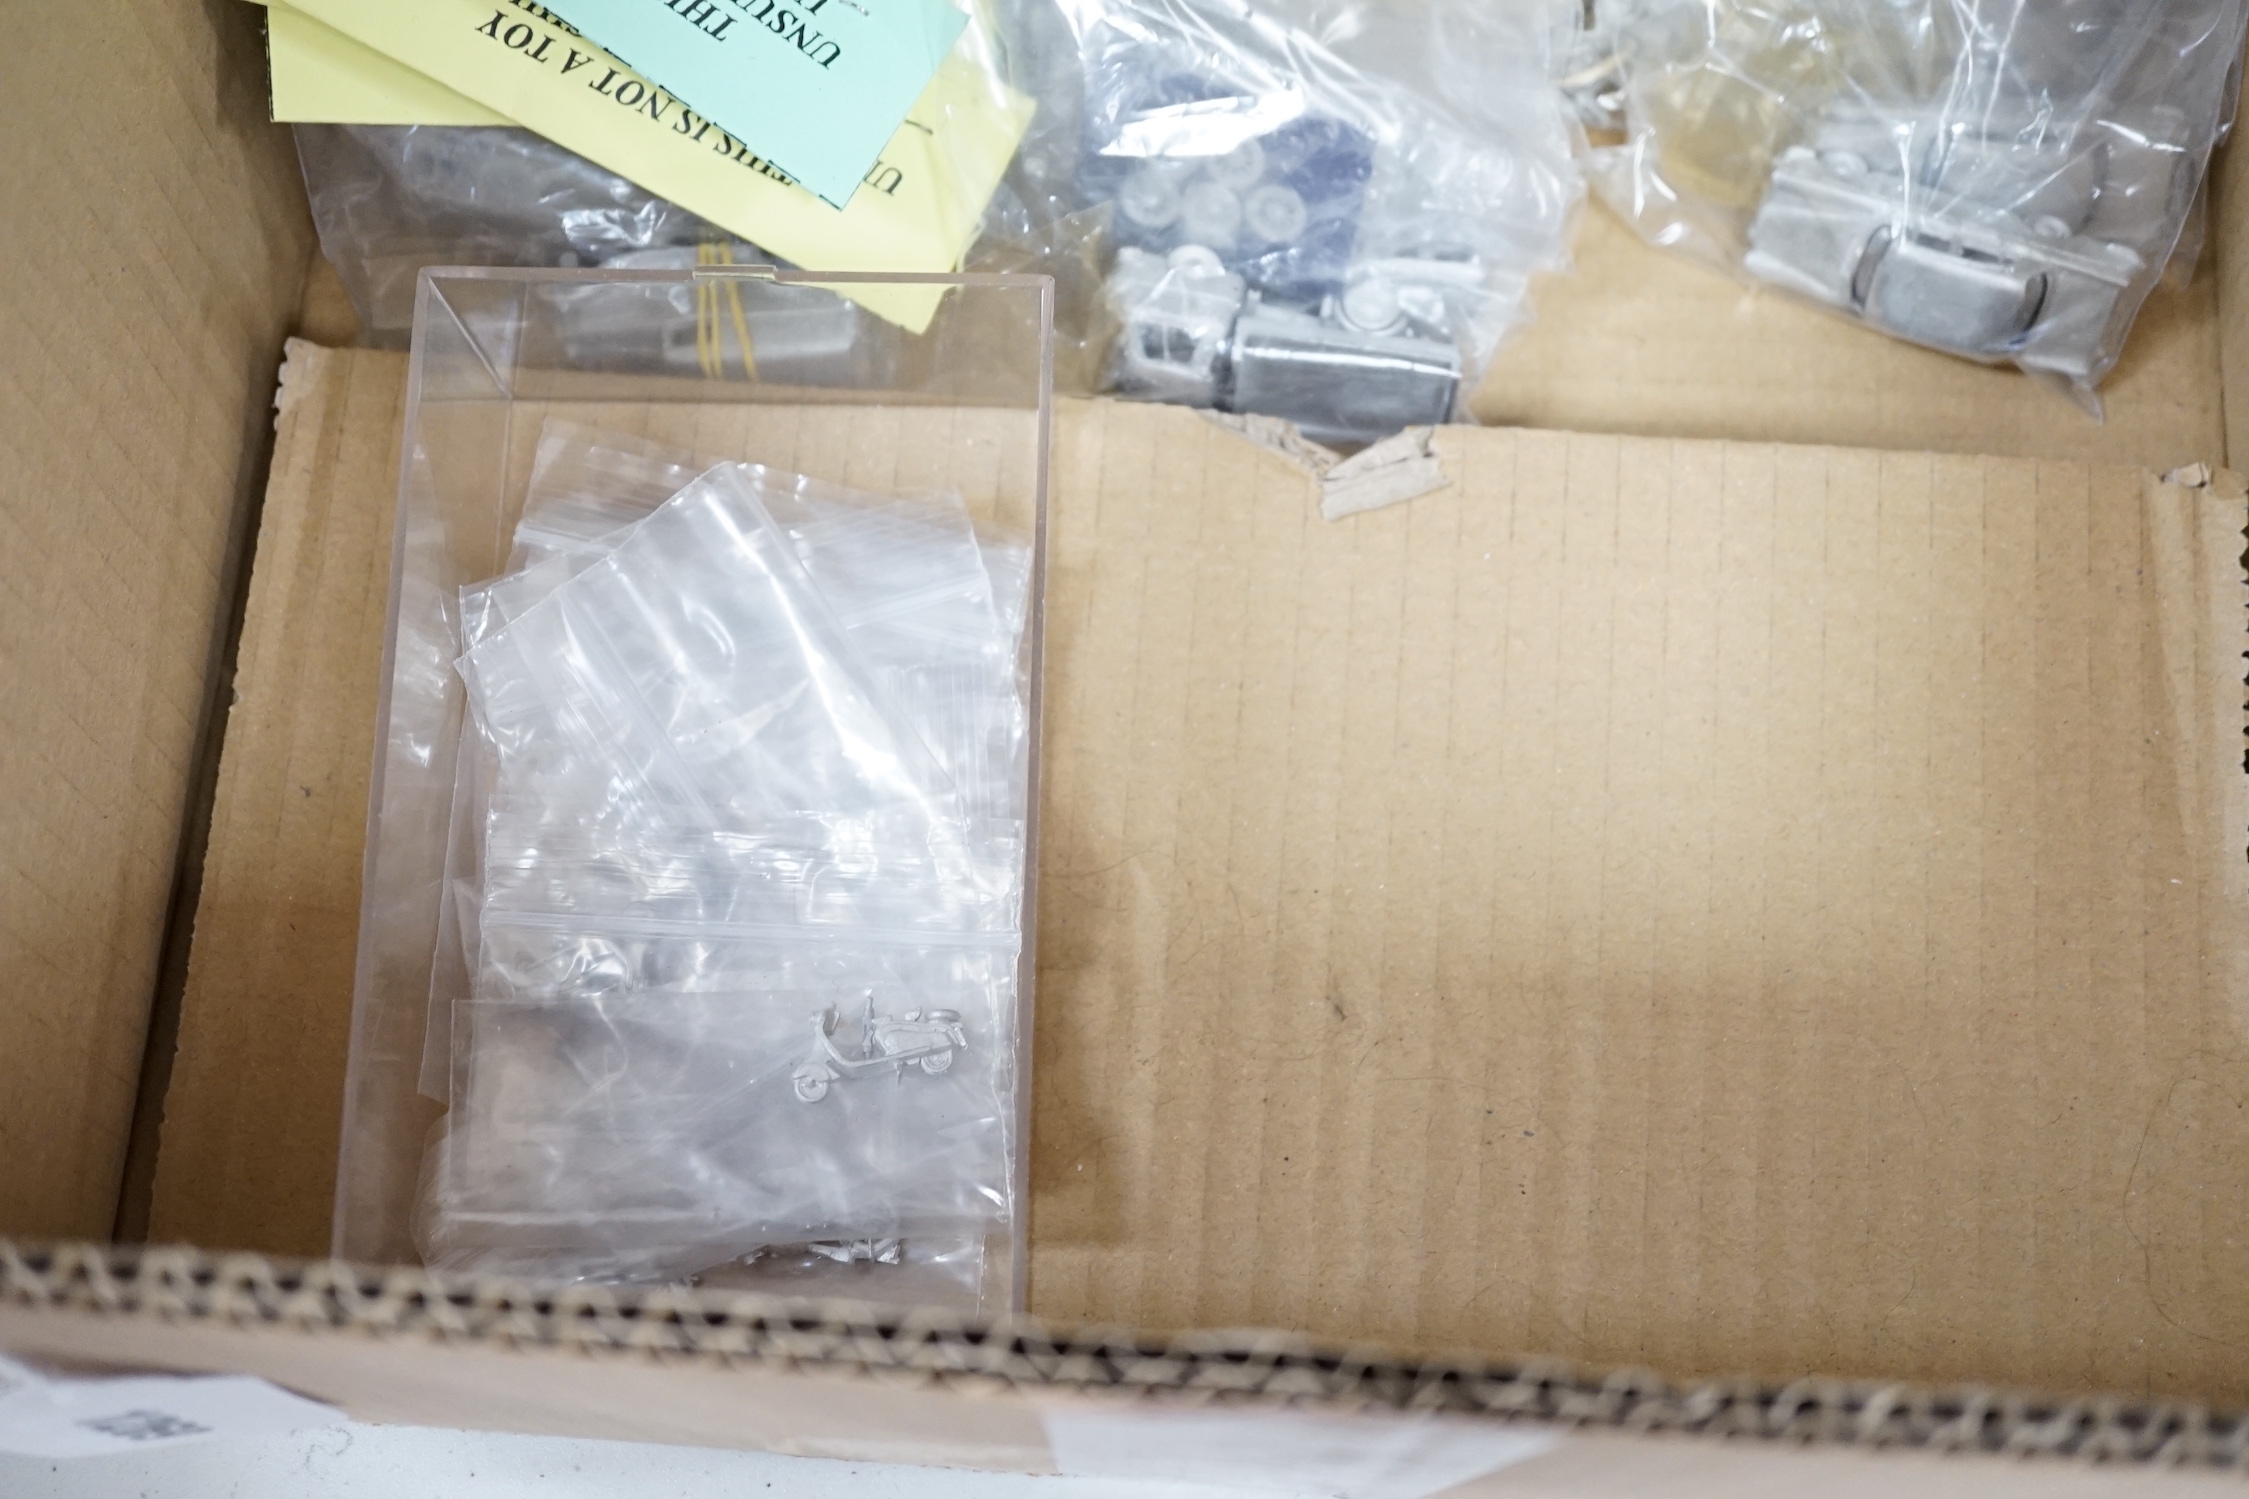 Forty 4mm, OO Gauge model railway unconstructed and packeted white metal kits, by Springside Models and R. Parker, including cars, commercial, vehicles, and motorcycles, together with two ratio kits for LMS clerestory co